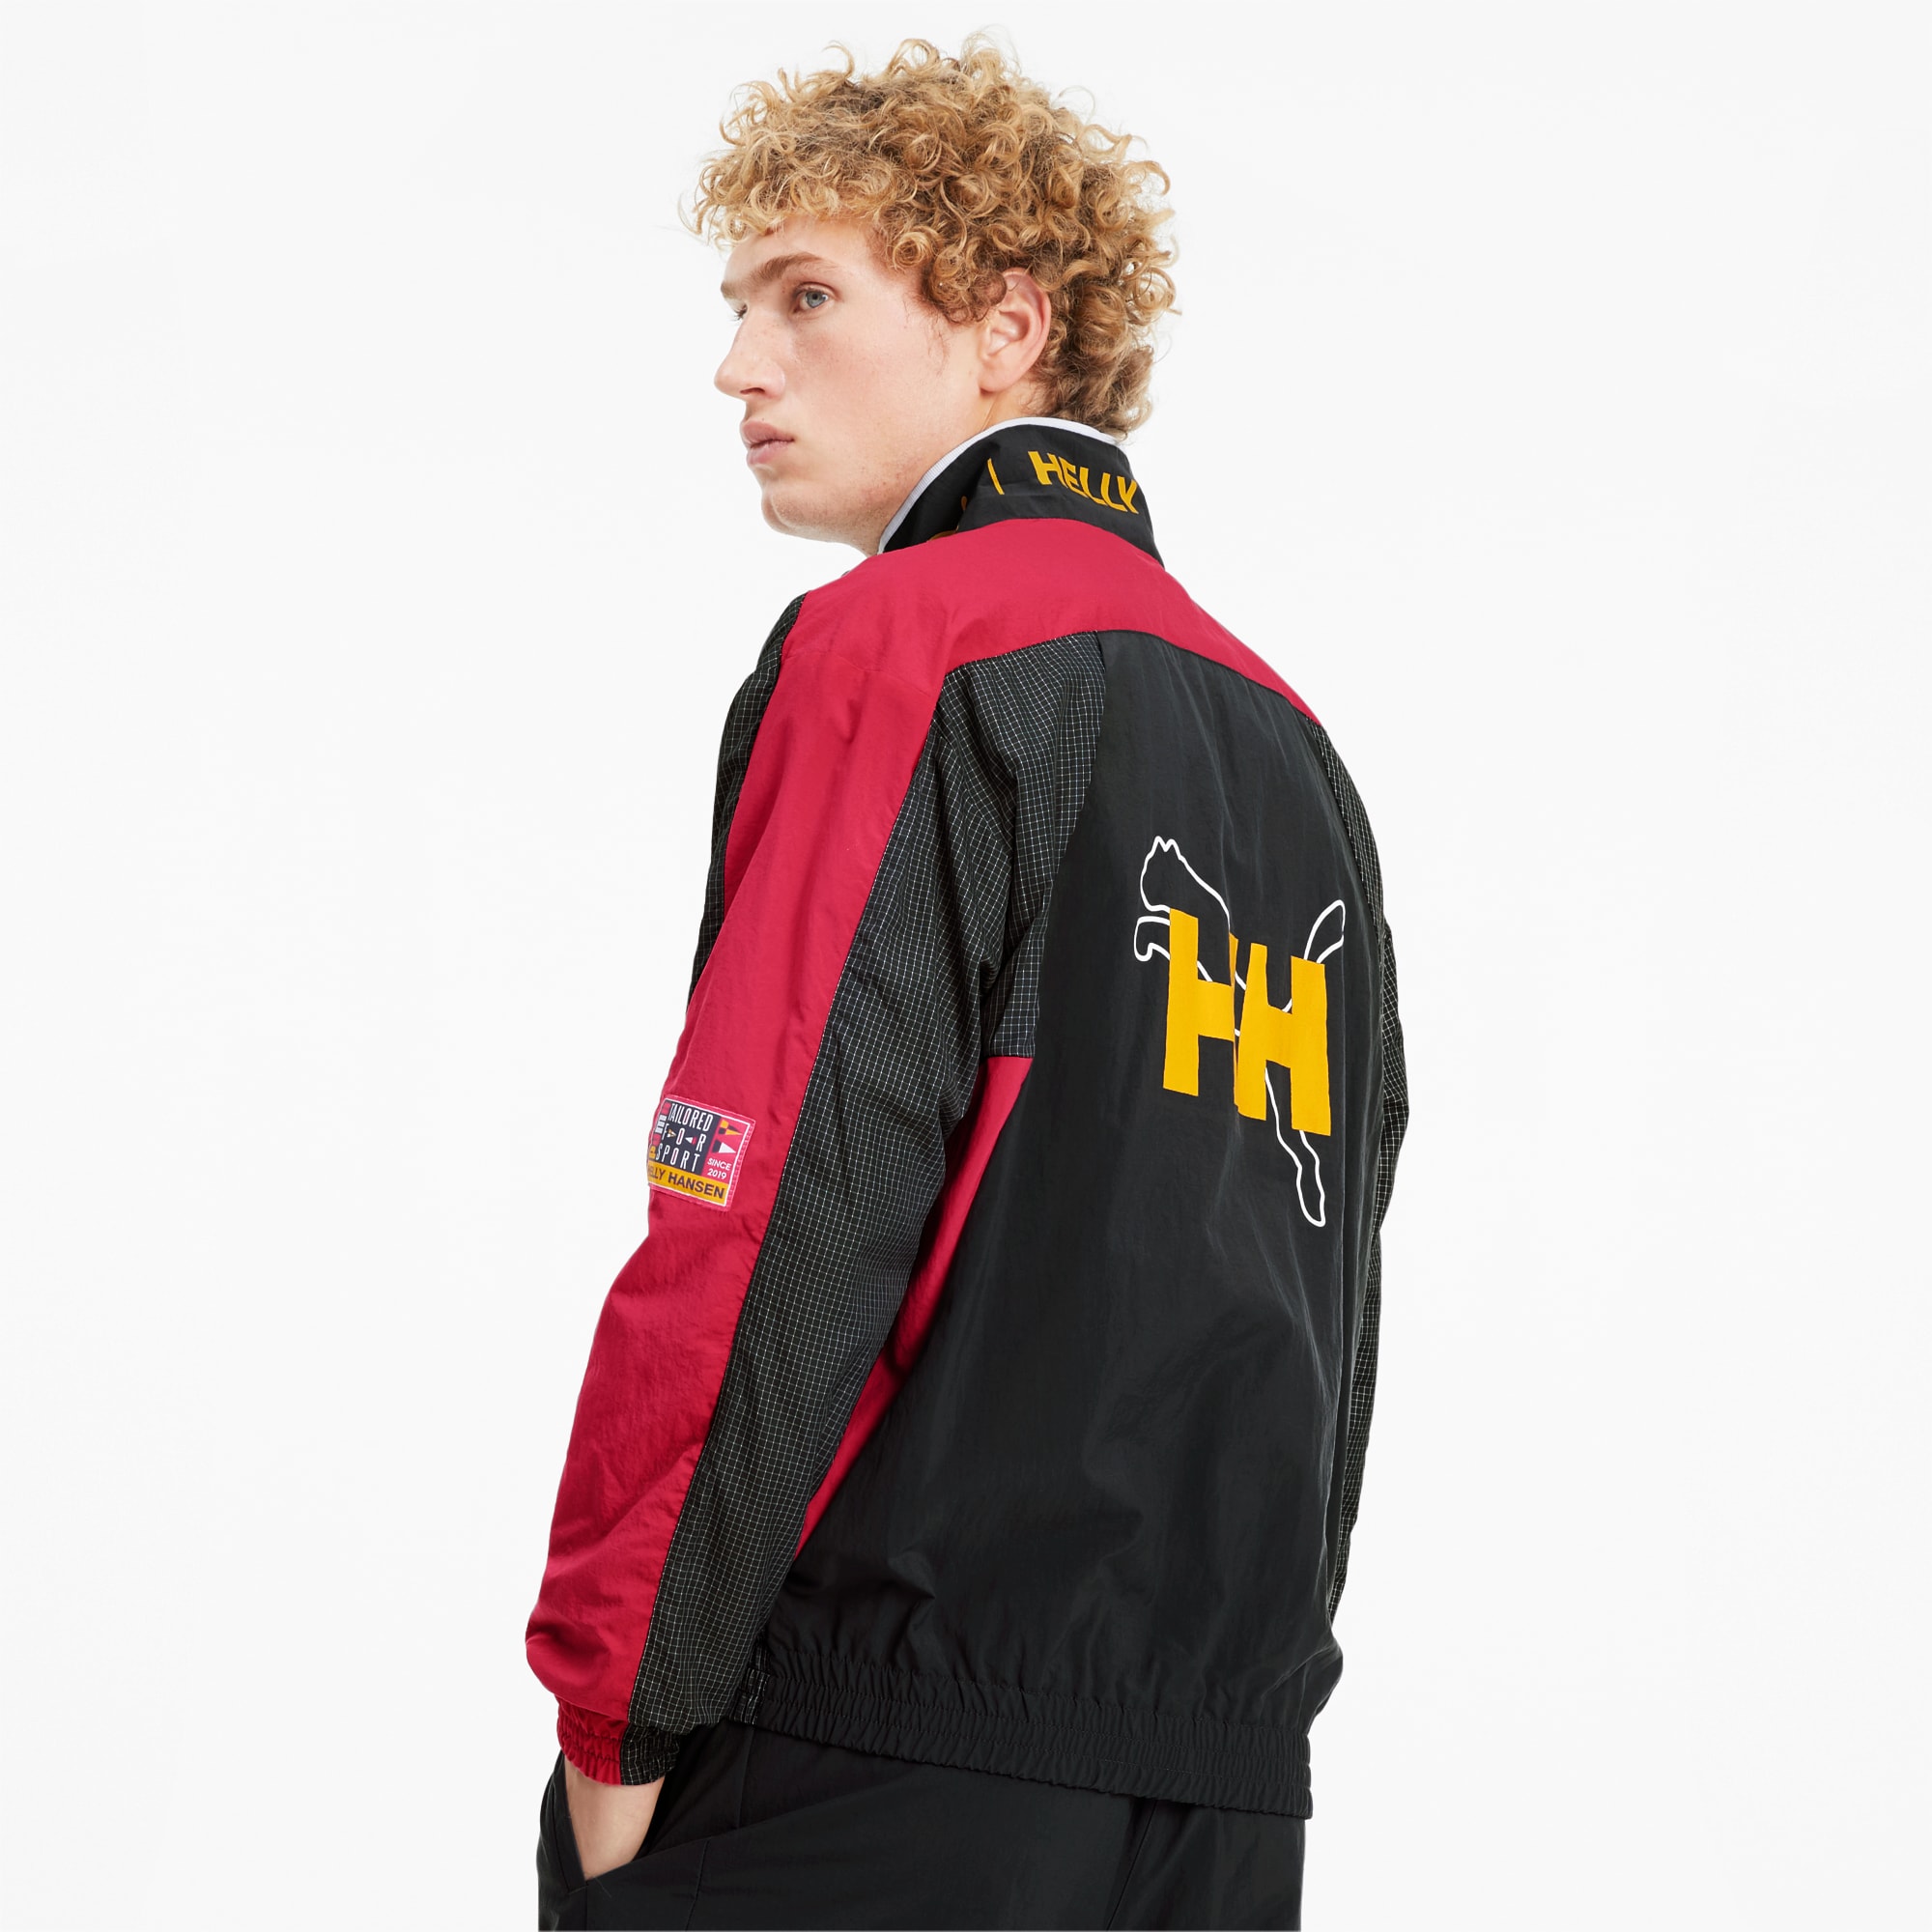 Puma X Helly Hansen Tailored For Sport Men S Track Top Bright